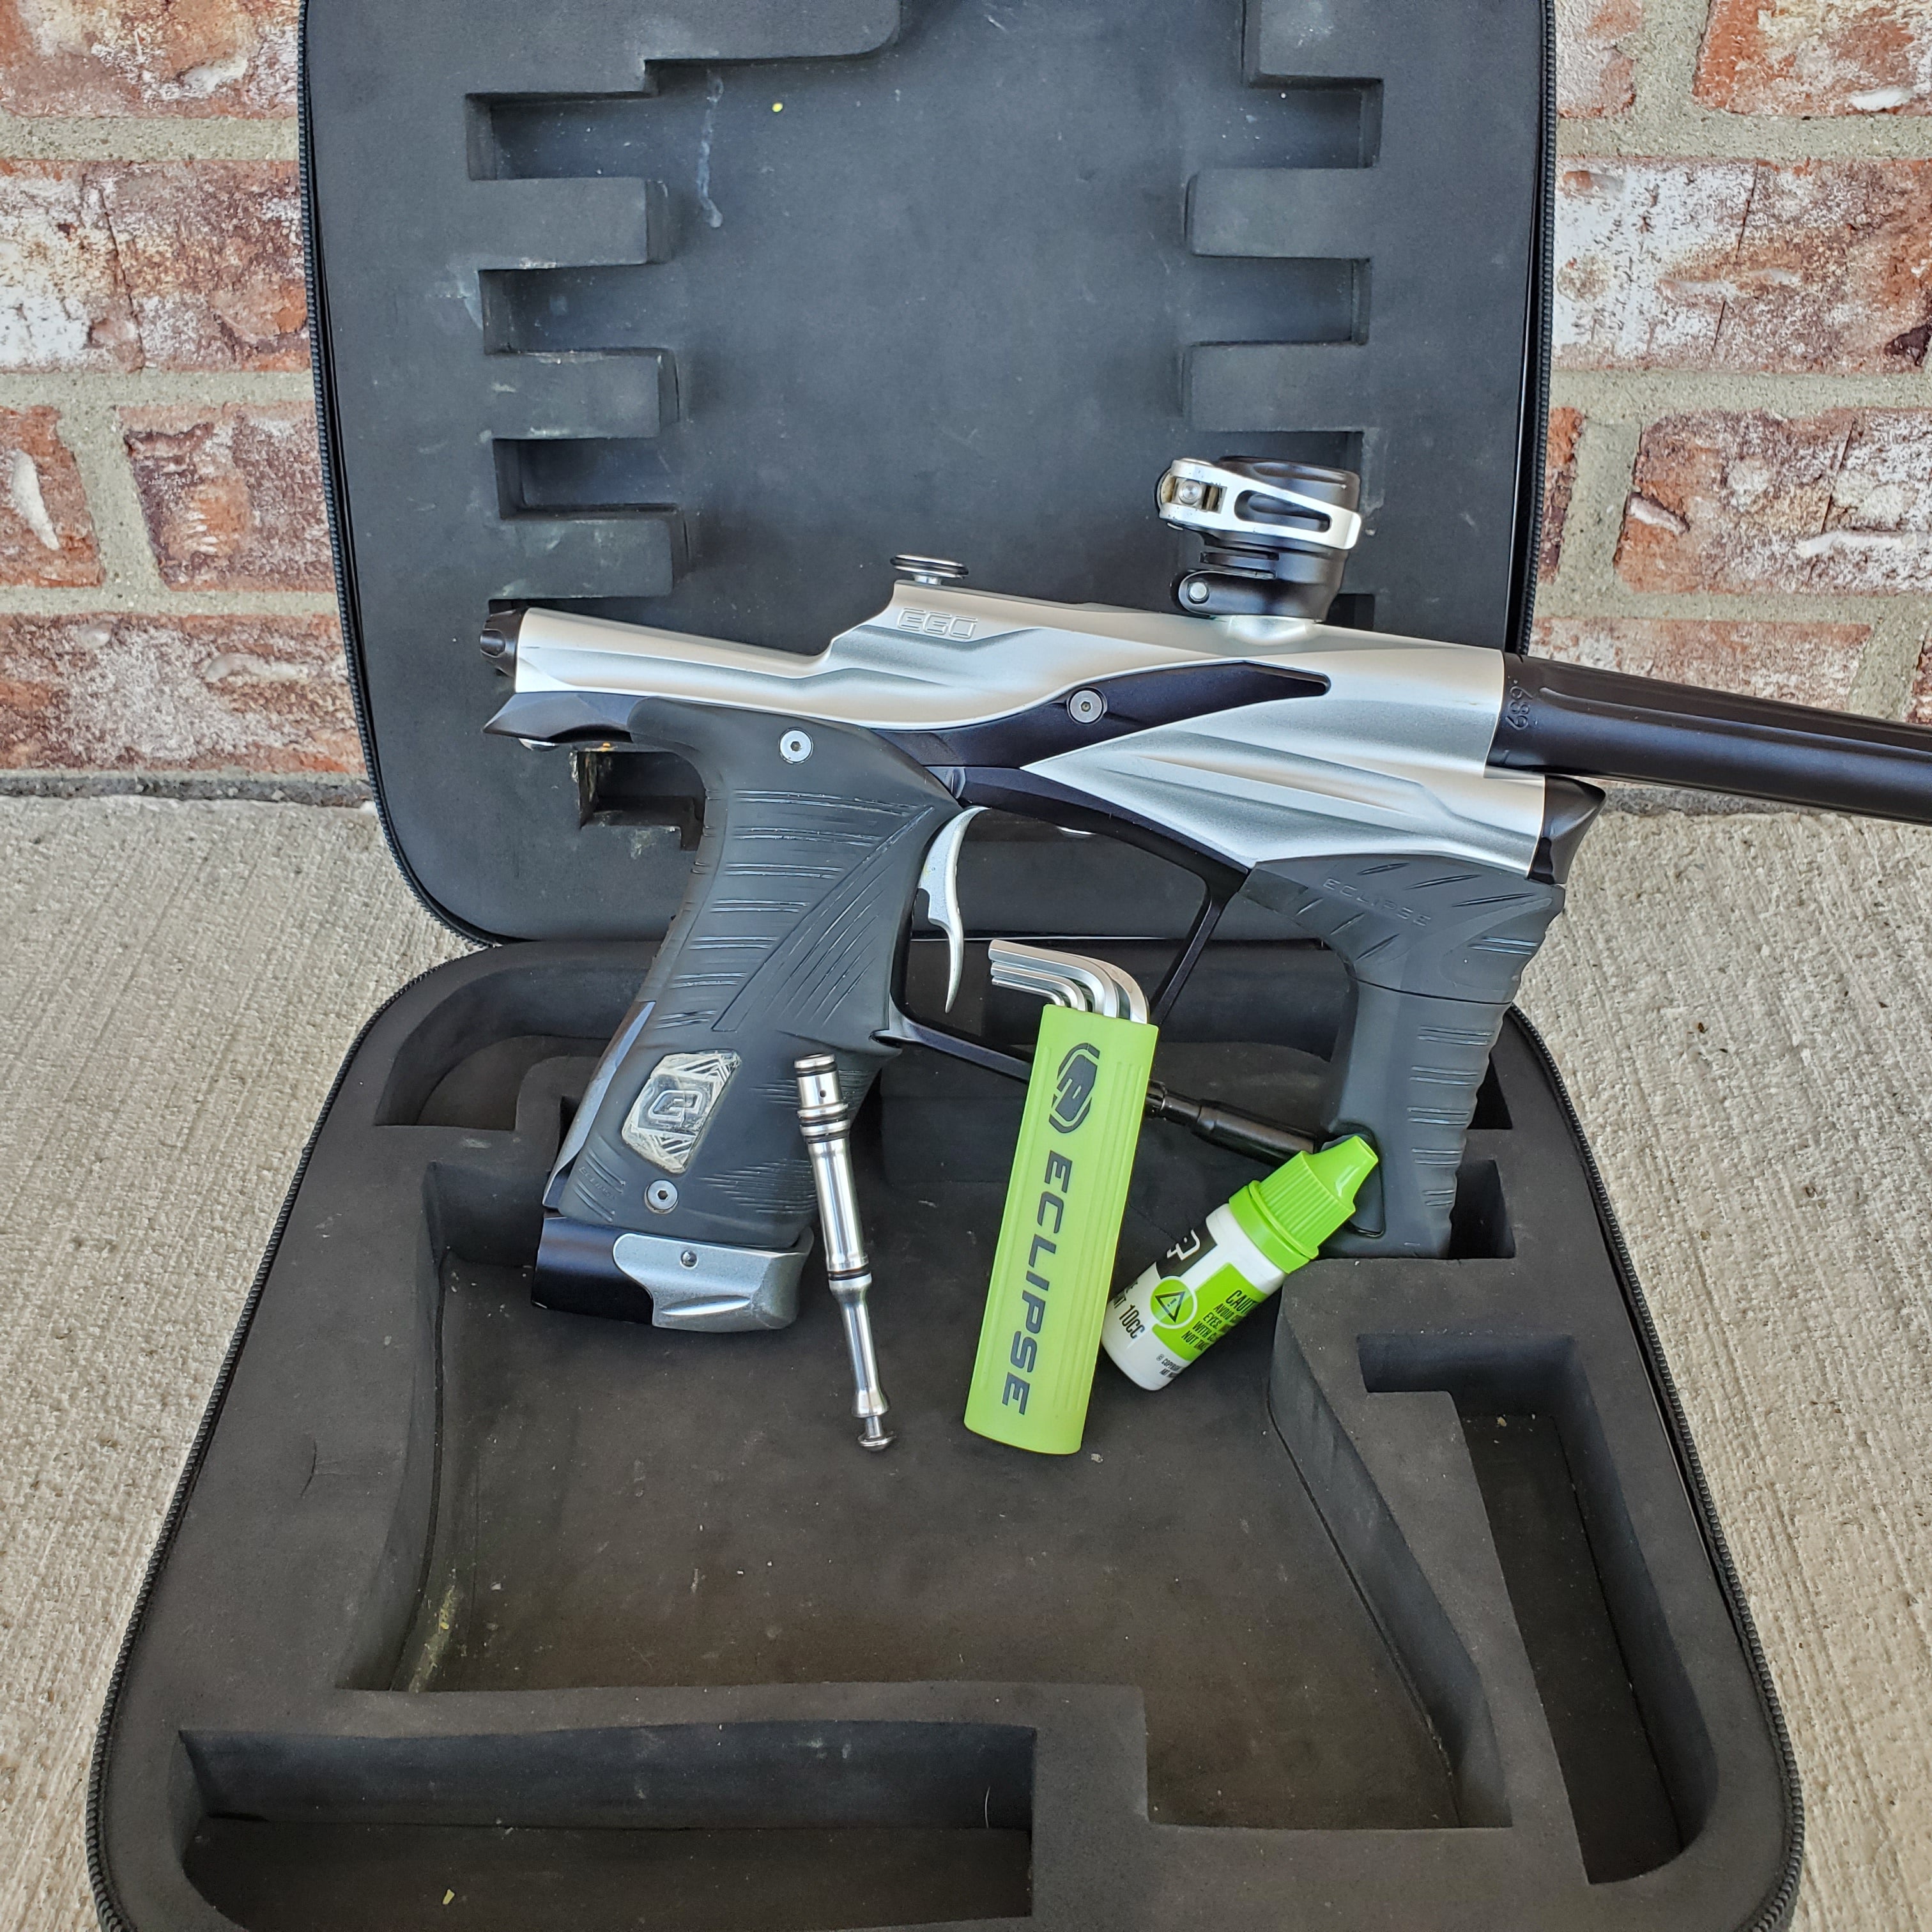 Used Planet Eclipse Ego Lv1.5 Paintball Marker- Silver/Black Fade